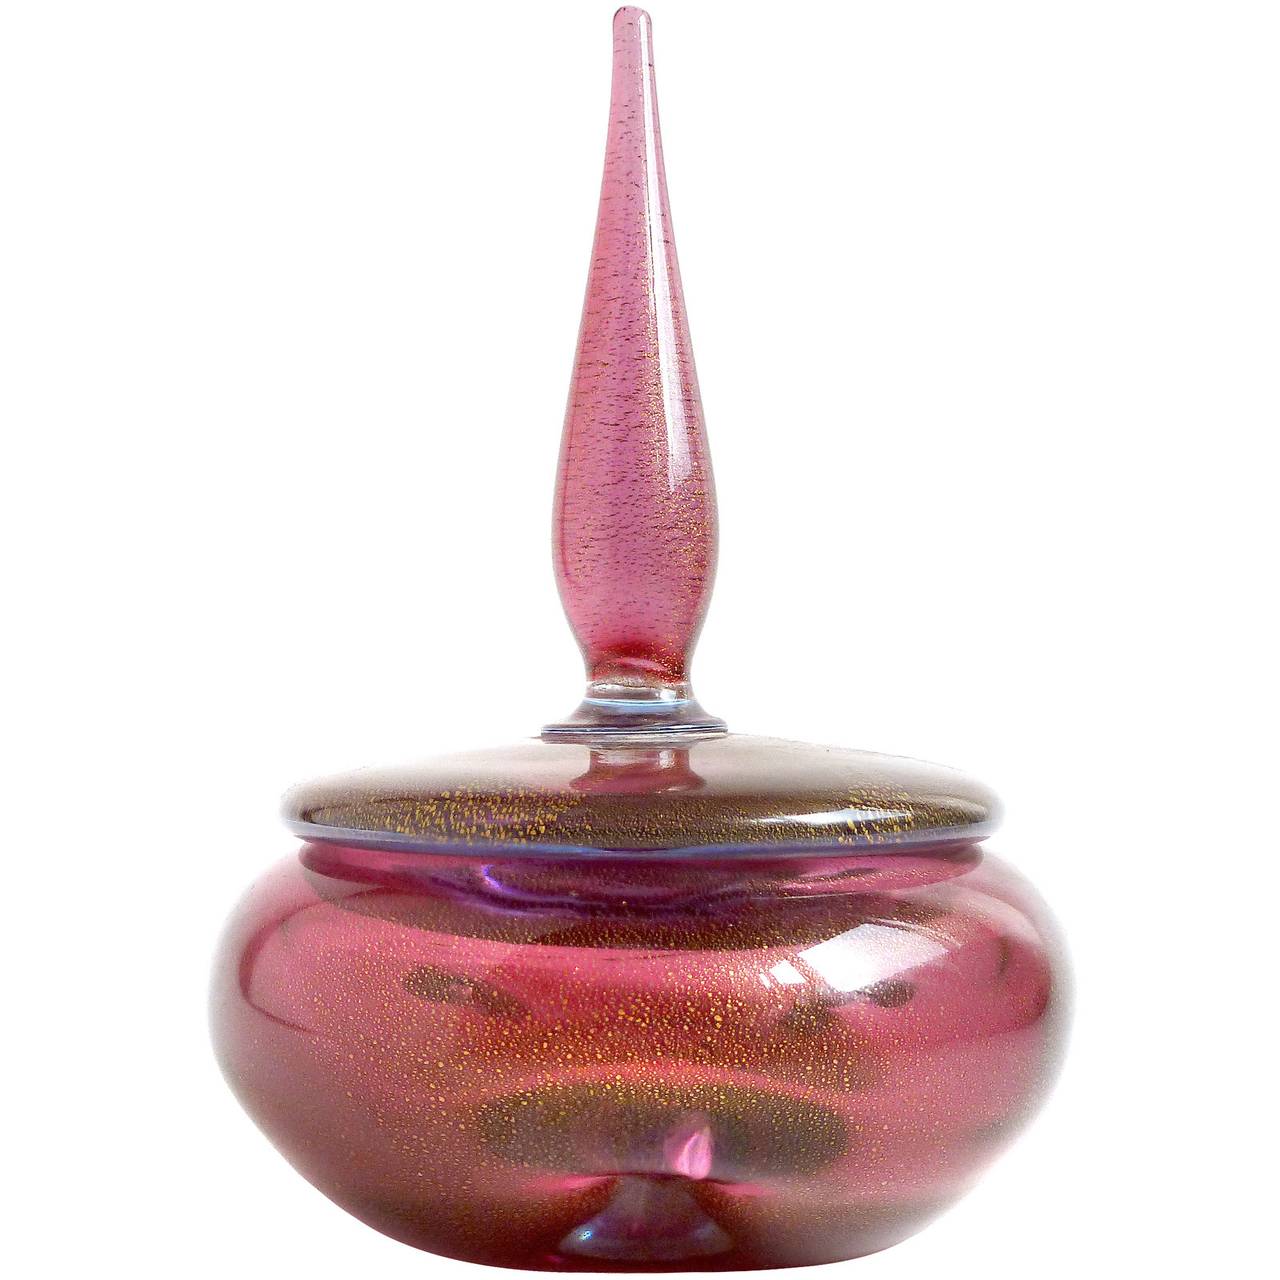 Gorgeous and elegant vintage Murano hand blown amethyst and gold flecks Italian art glass powder or jewelry box and perfume bottles set. Documented to designer Alfredo Barbini, circa 1950s. All pieces have three cute dimples on the body, with a